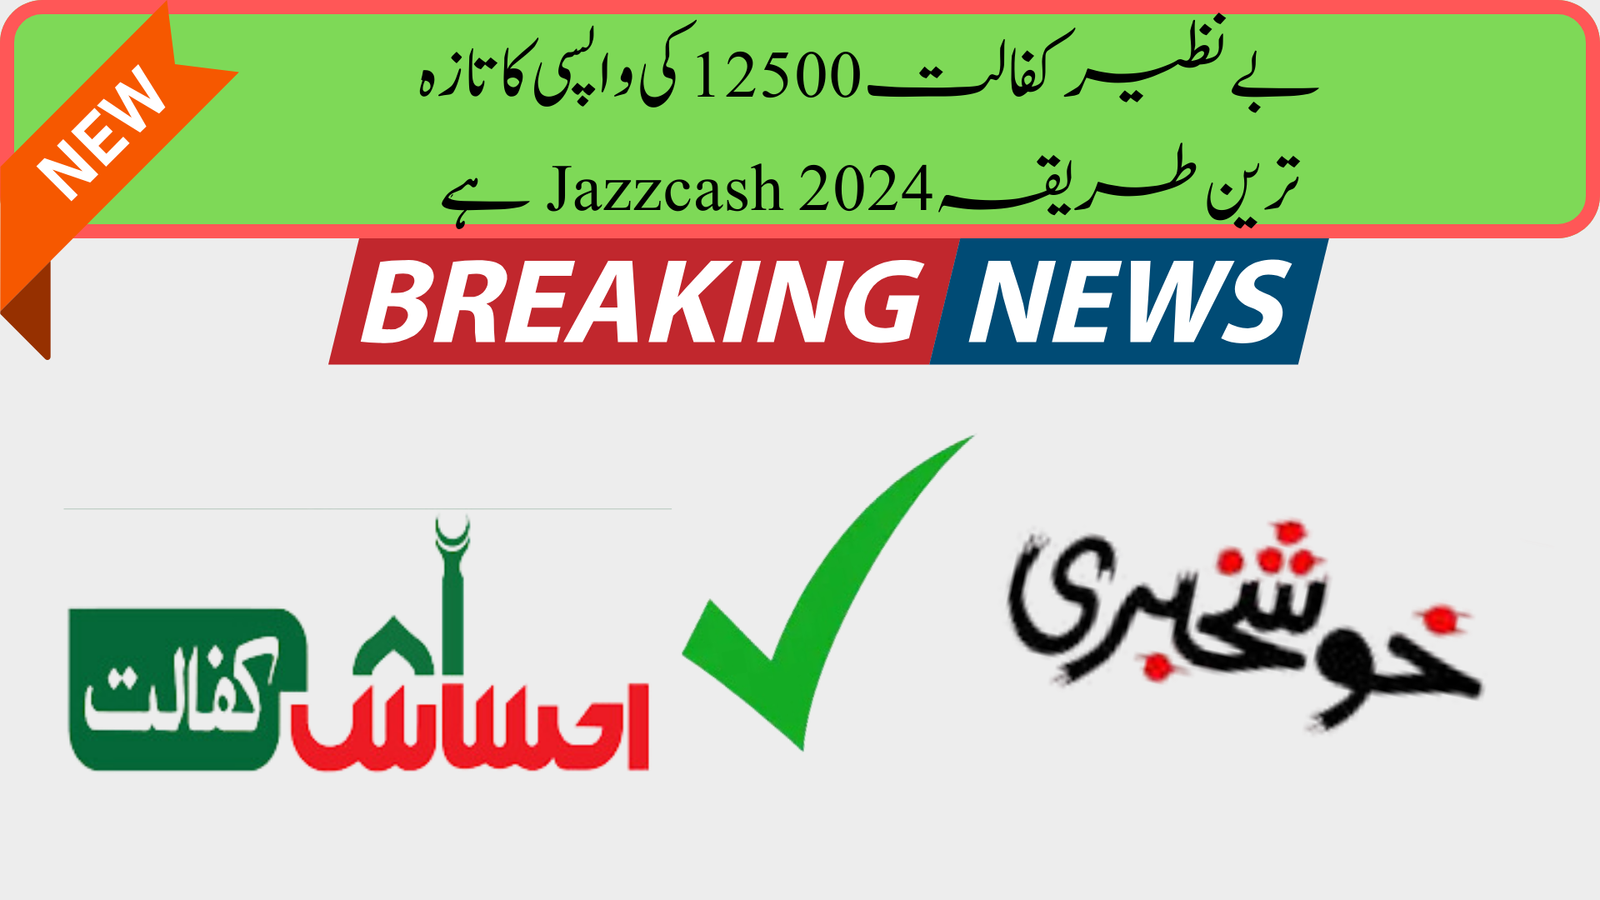 The most recent withdrawal method for Benazir Kafalat 12500 is Jazzcash